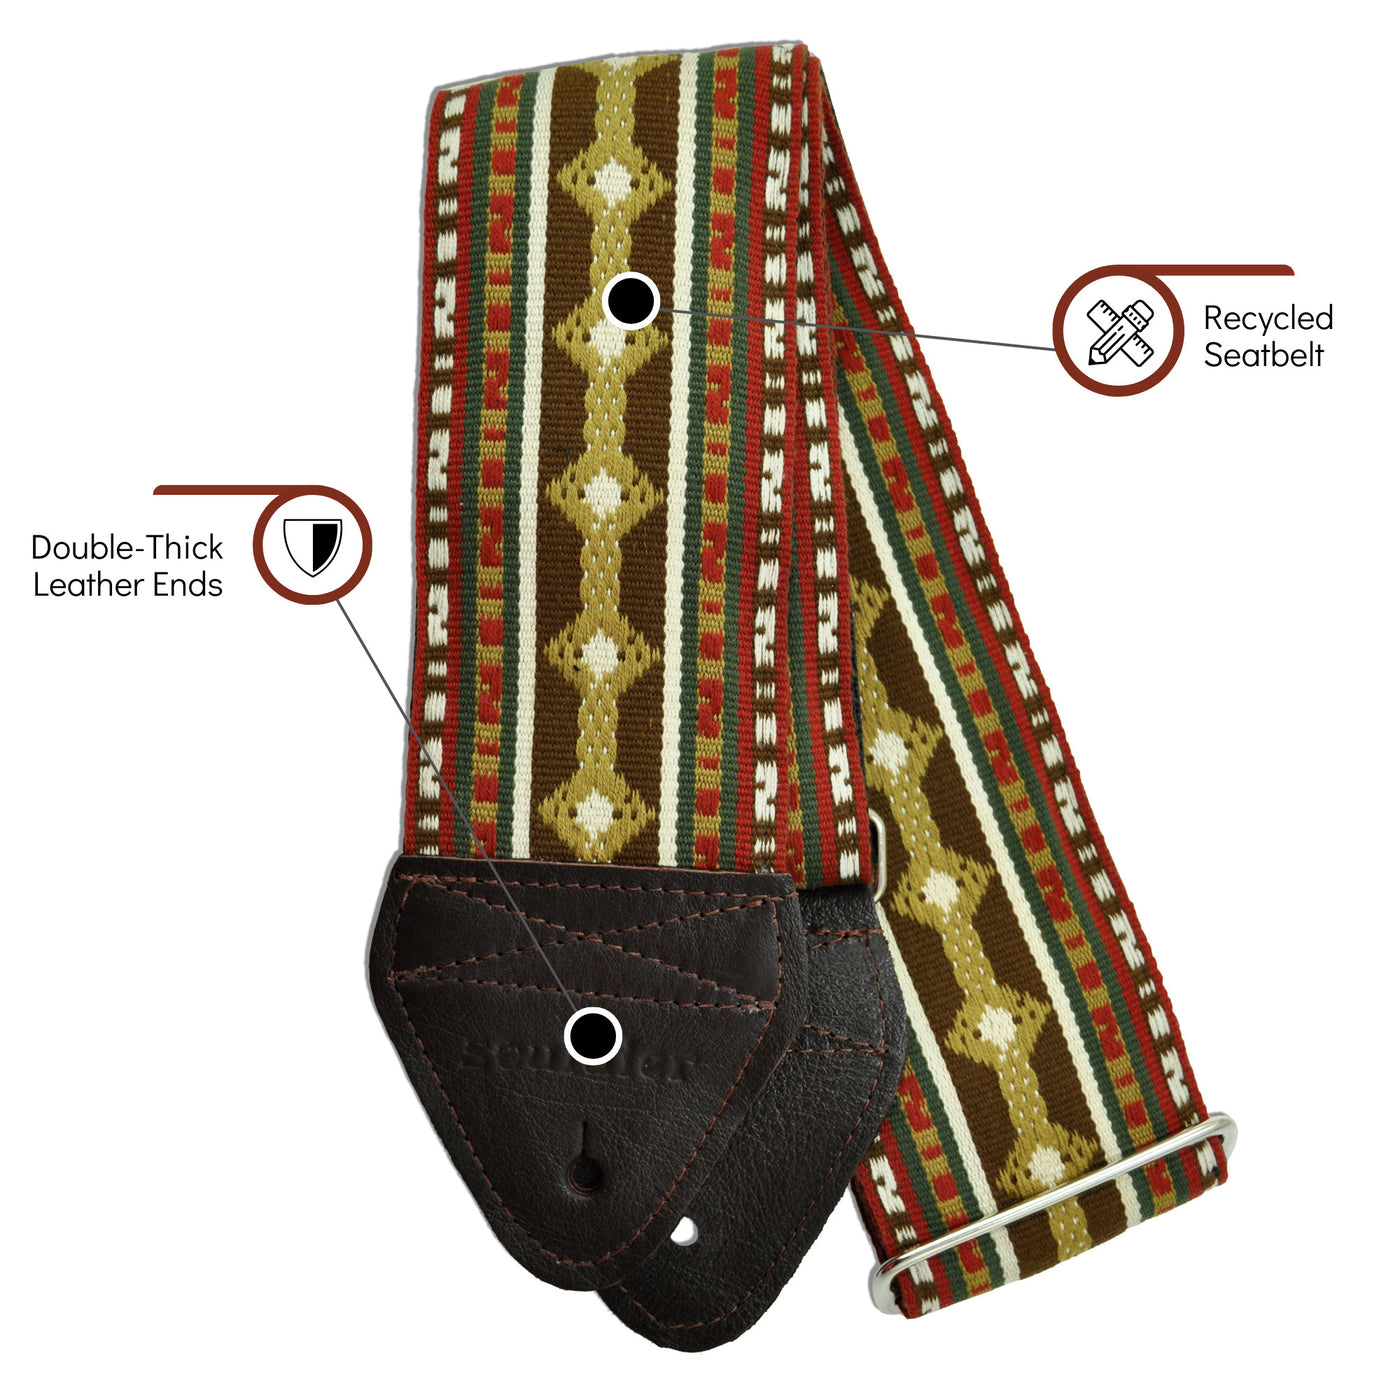 Souldier GT1181BK02DB - Handmade Souldier Fabric Bass Strap, 3 Inches Wide and Adjustable from 33" to 60" Made in the USA, Gold/Brown